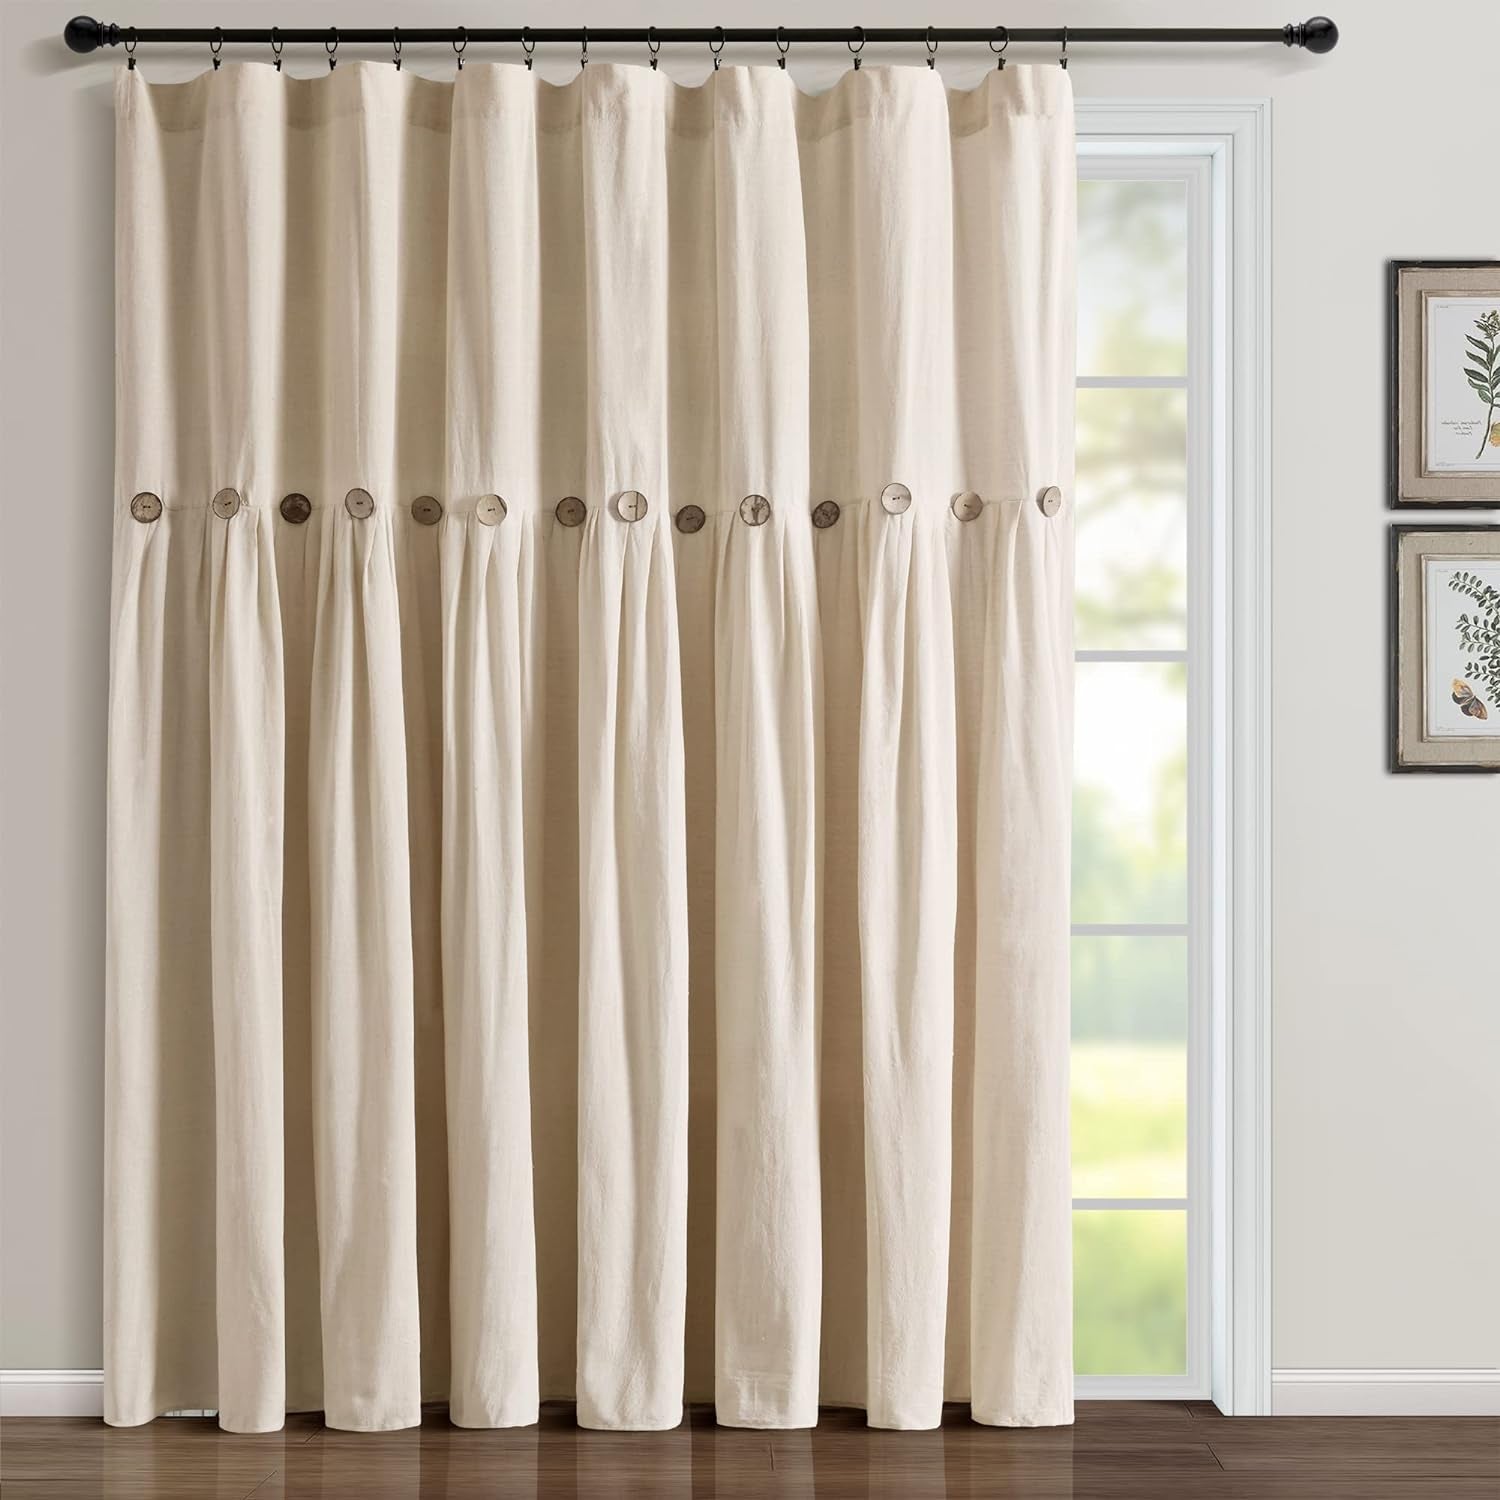 Lush Decor Linen Button Window Curtain Panel, Single, 40" W X 84" L, Linen - Country Curtains - Rustic Decor - Color Block Modern Farmhouse Curtains for Living Room, Bedroom & Dining Room  Triangle Home Fashions   